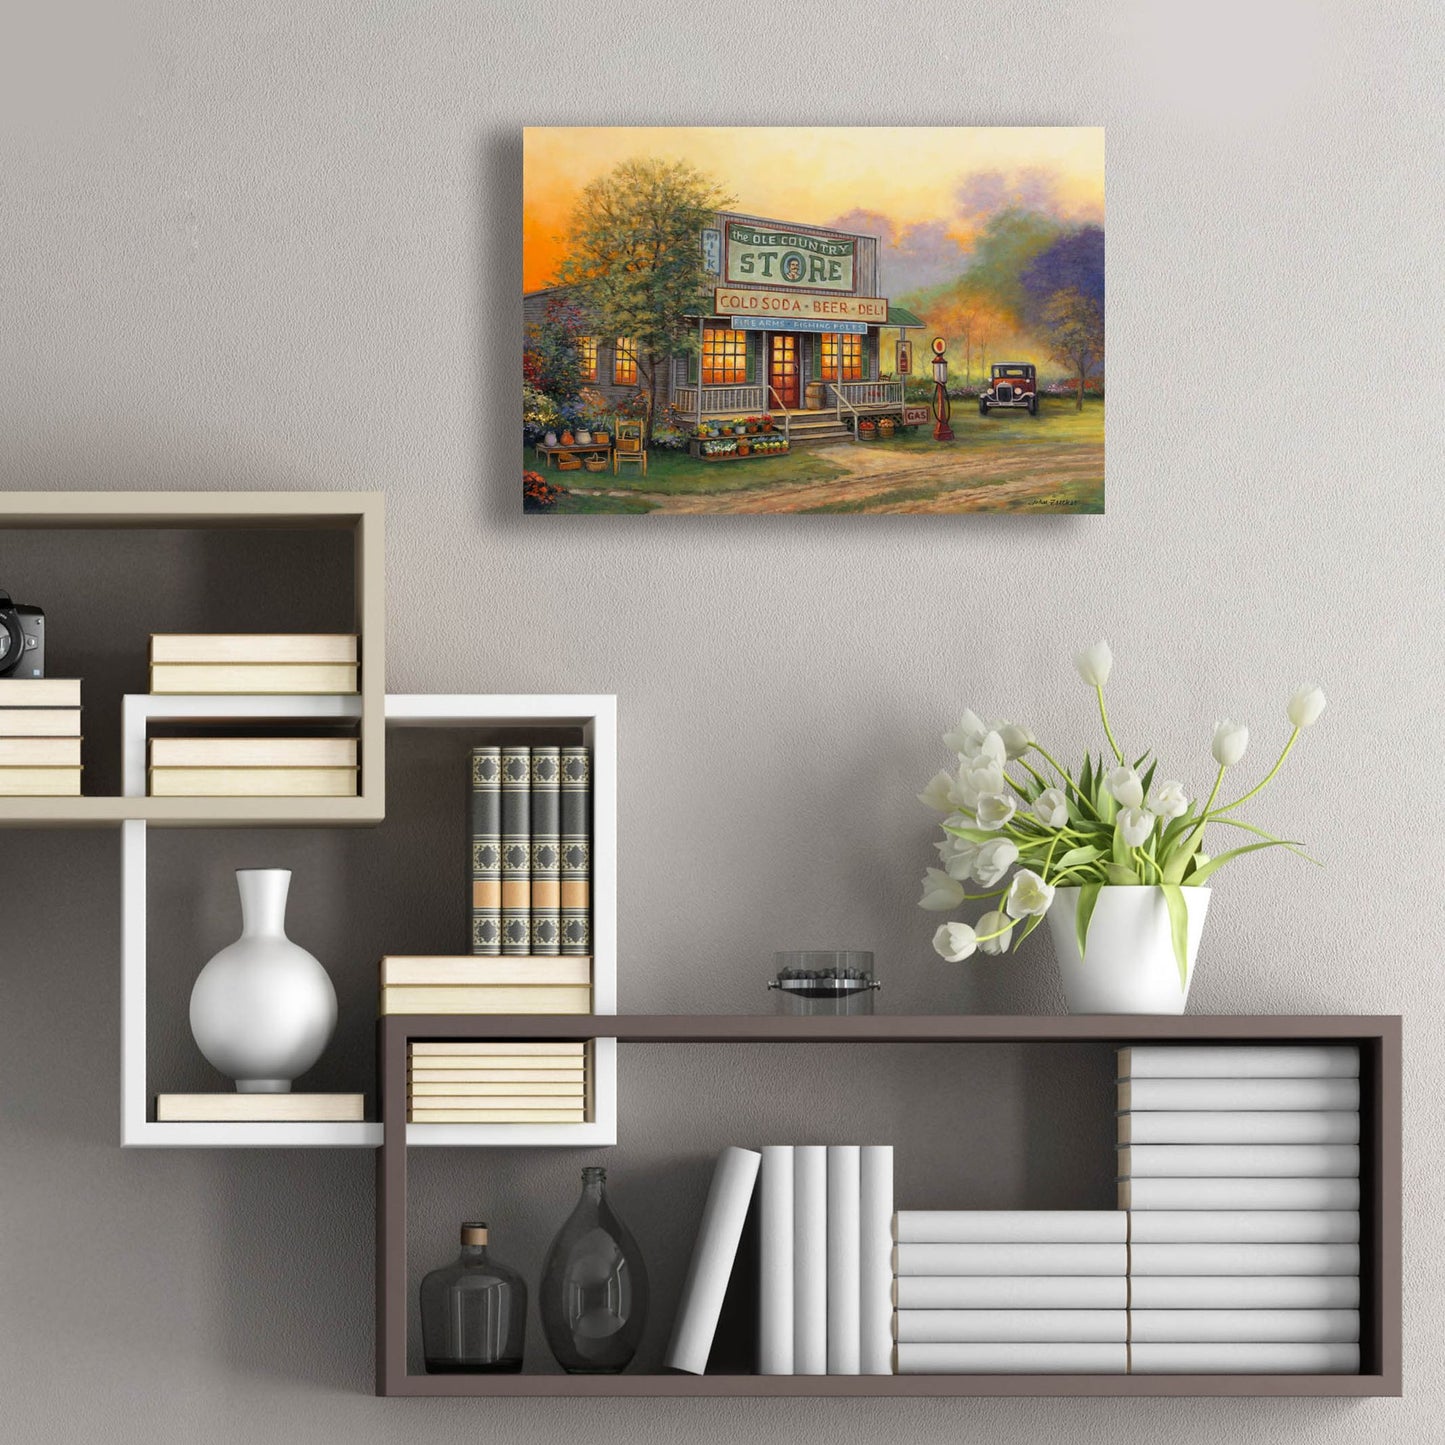 Epic Art 'Old Country Store' by John Zaccheo, Acrylic Glass Wall Art,24x16